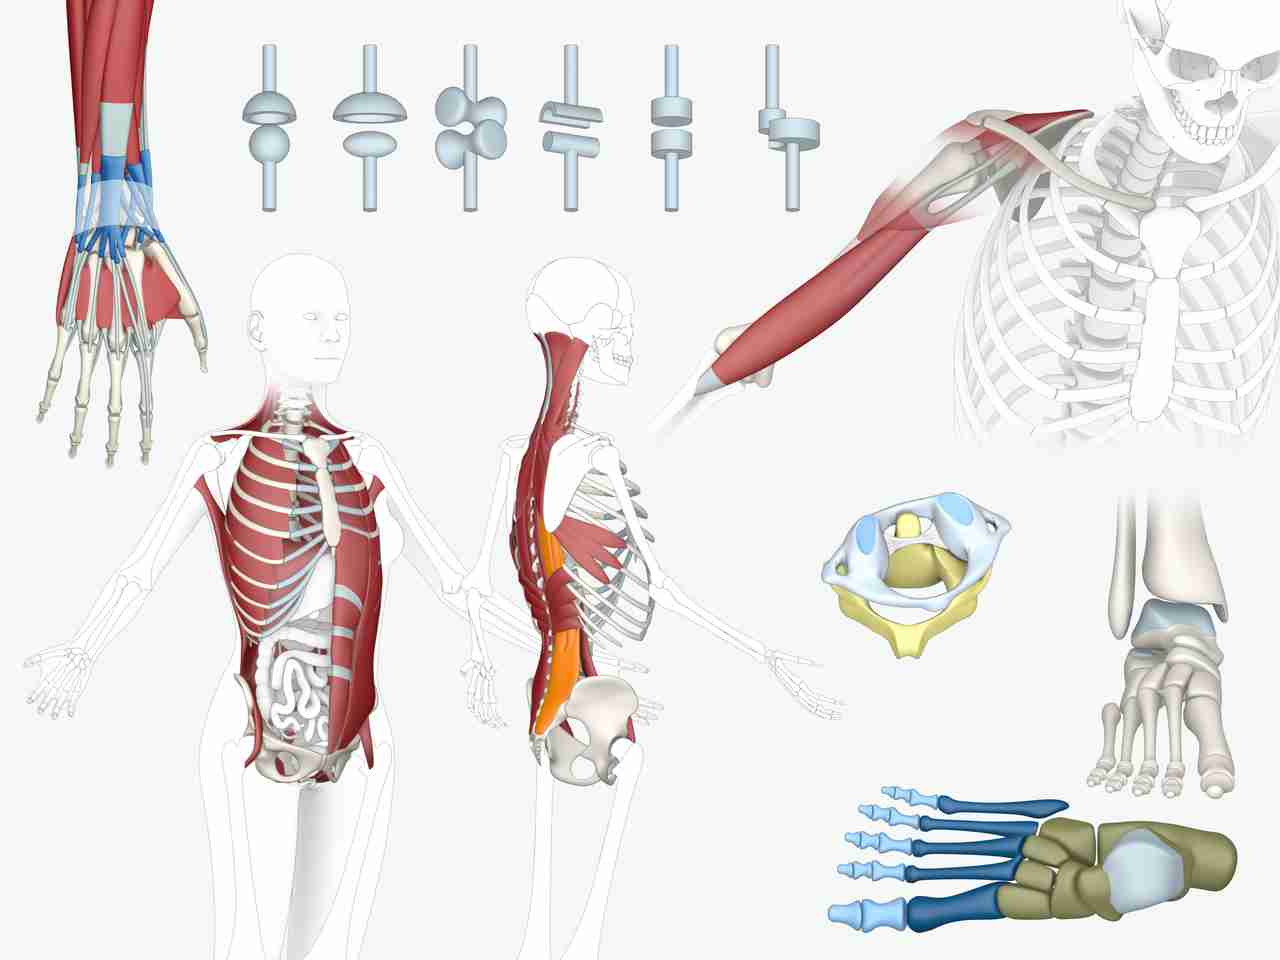 Anatomical Illustrations for eLearning